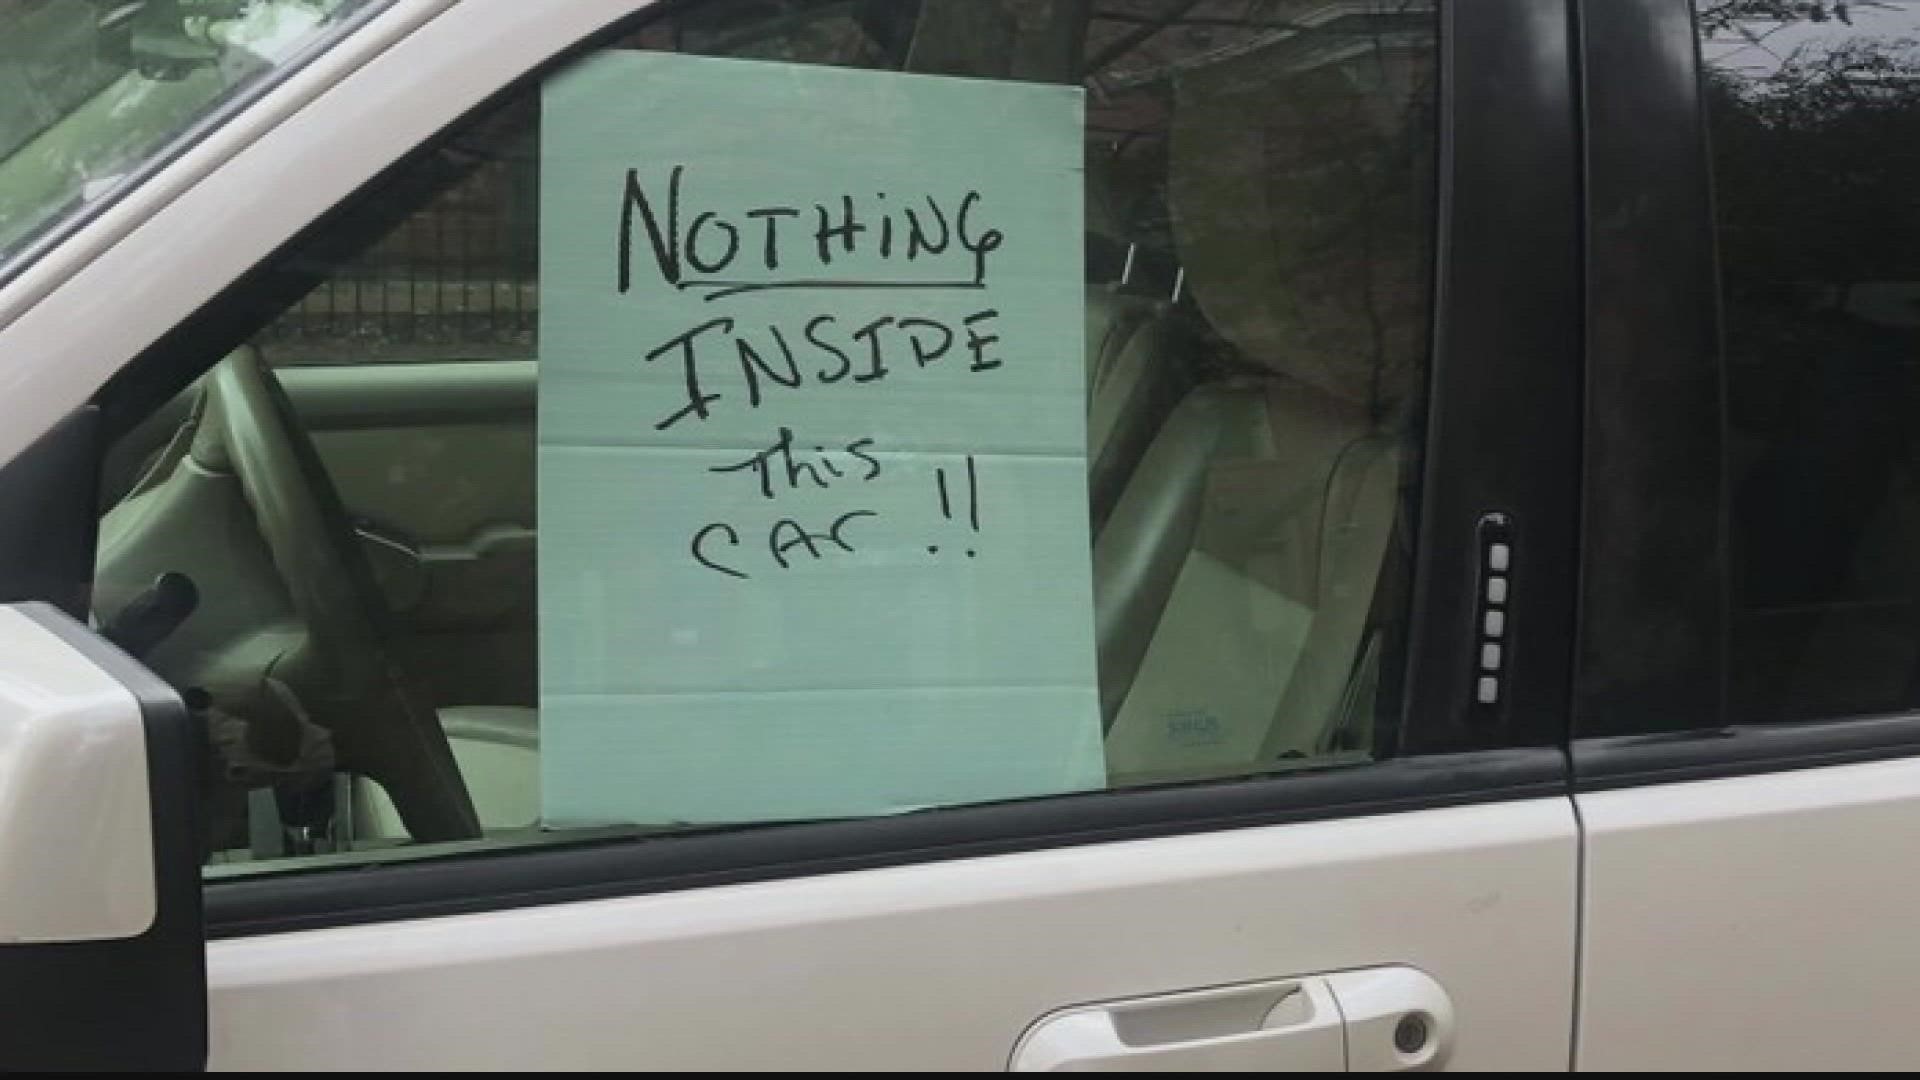 Carjackings have been a huge problem everywhere in the area. So one person is getting creative to try and stop it.